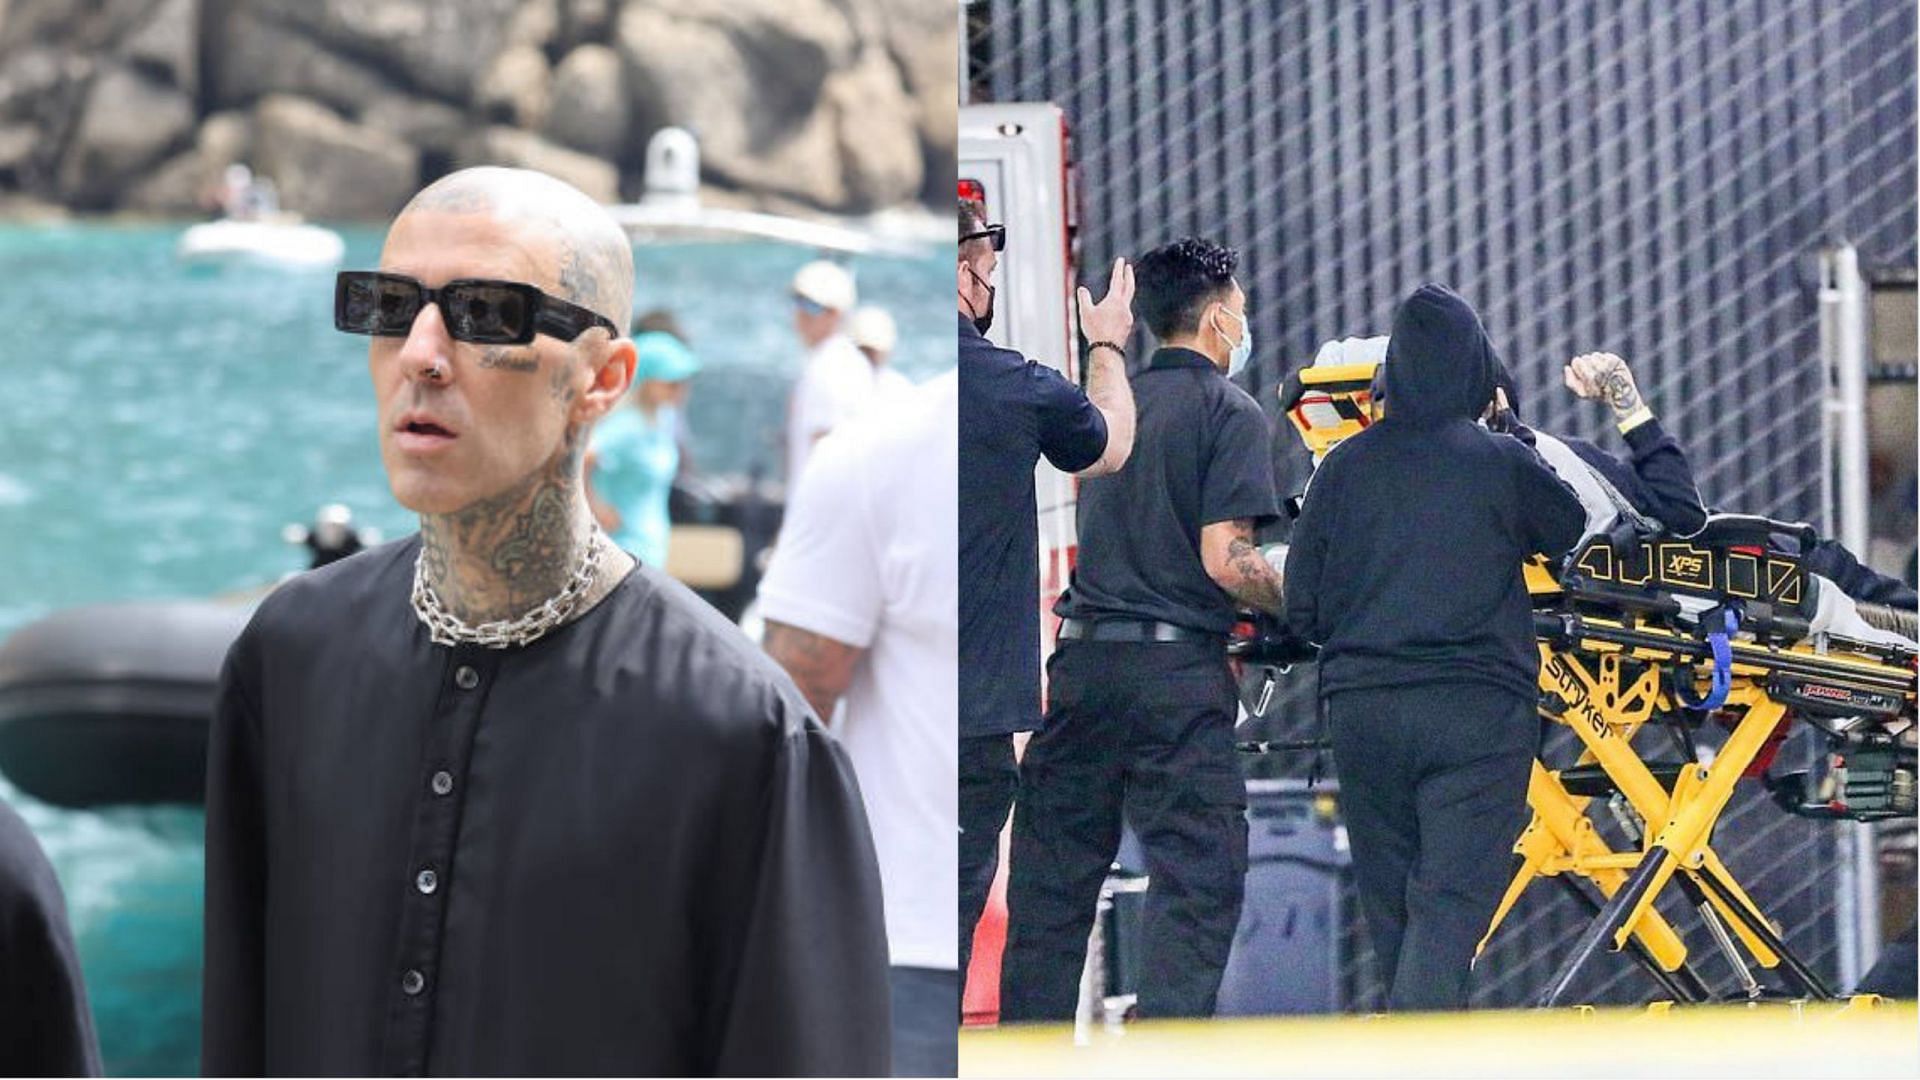 Travis Barker has been taken to the Cedars-Sinai Medical Center in LA (Image via NINO/Getty Images and @JermaineWatkins/Twitter)